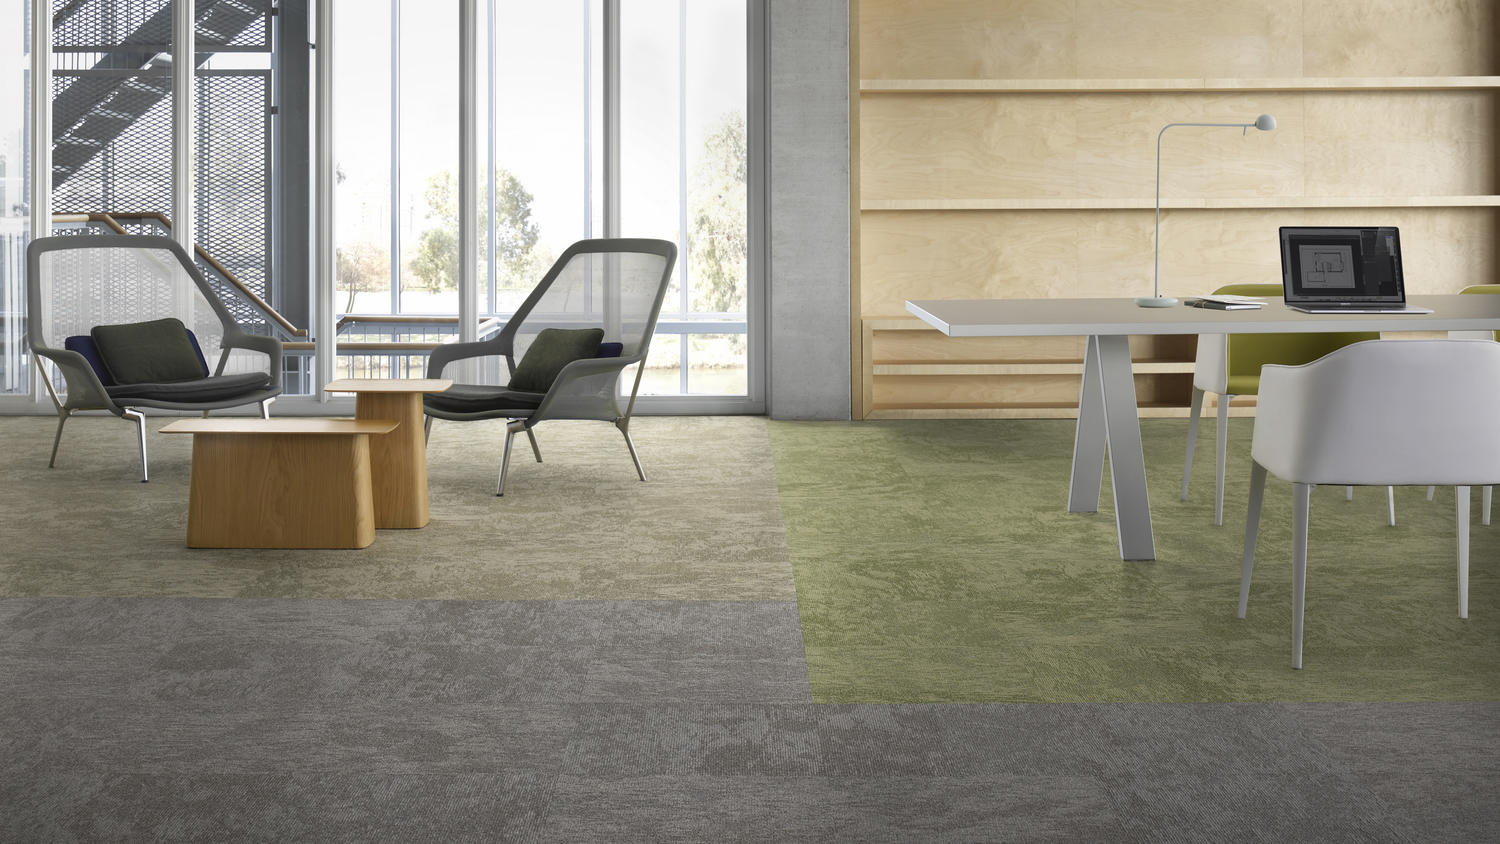 Desso Desert Carpet Tile used in large open commercial office space, in grey and green tones